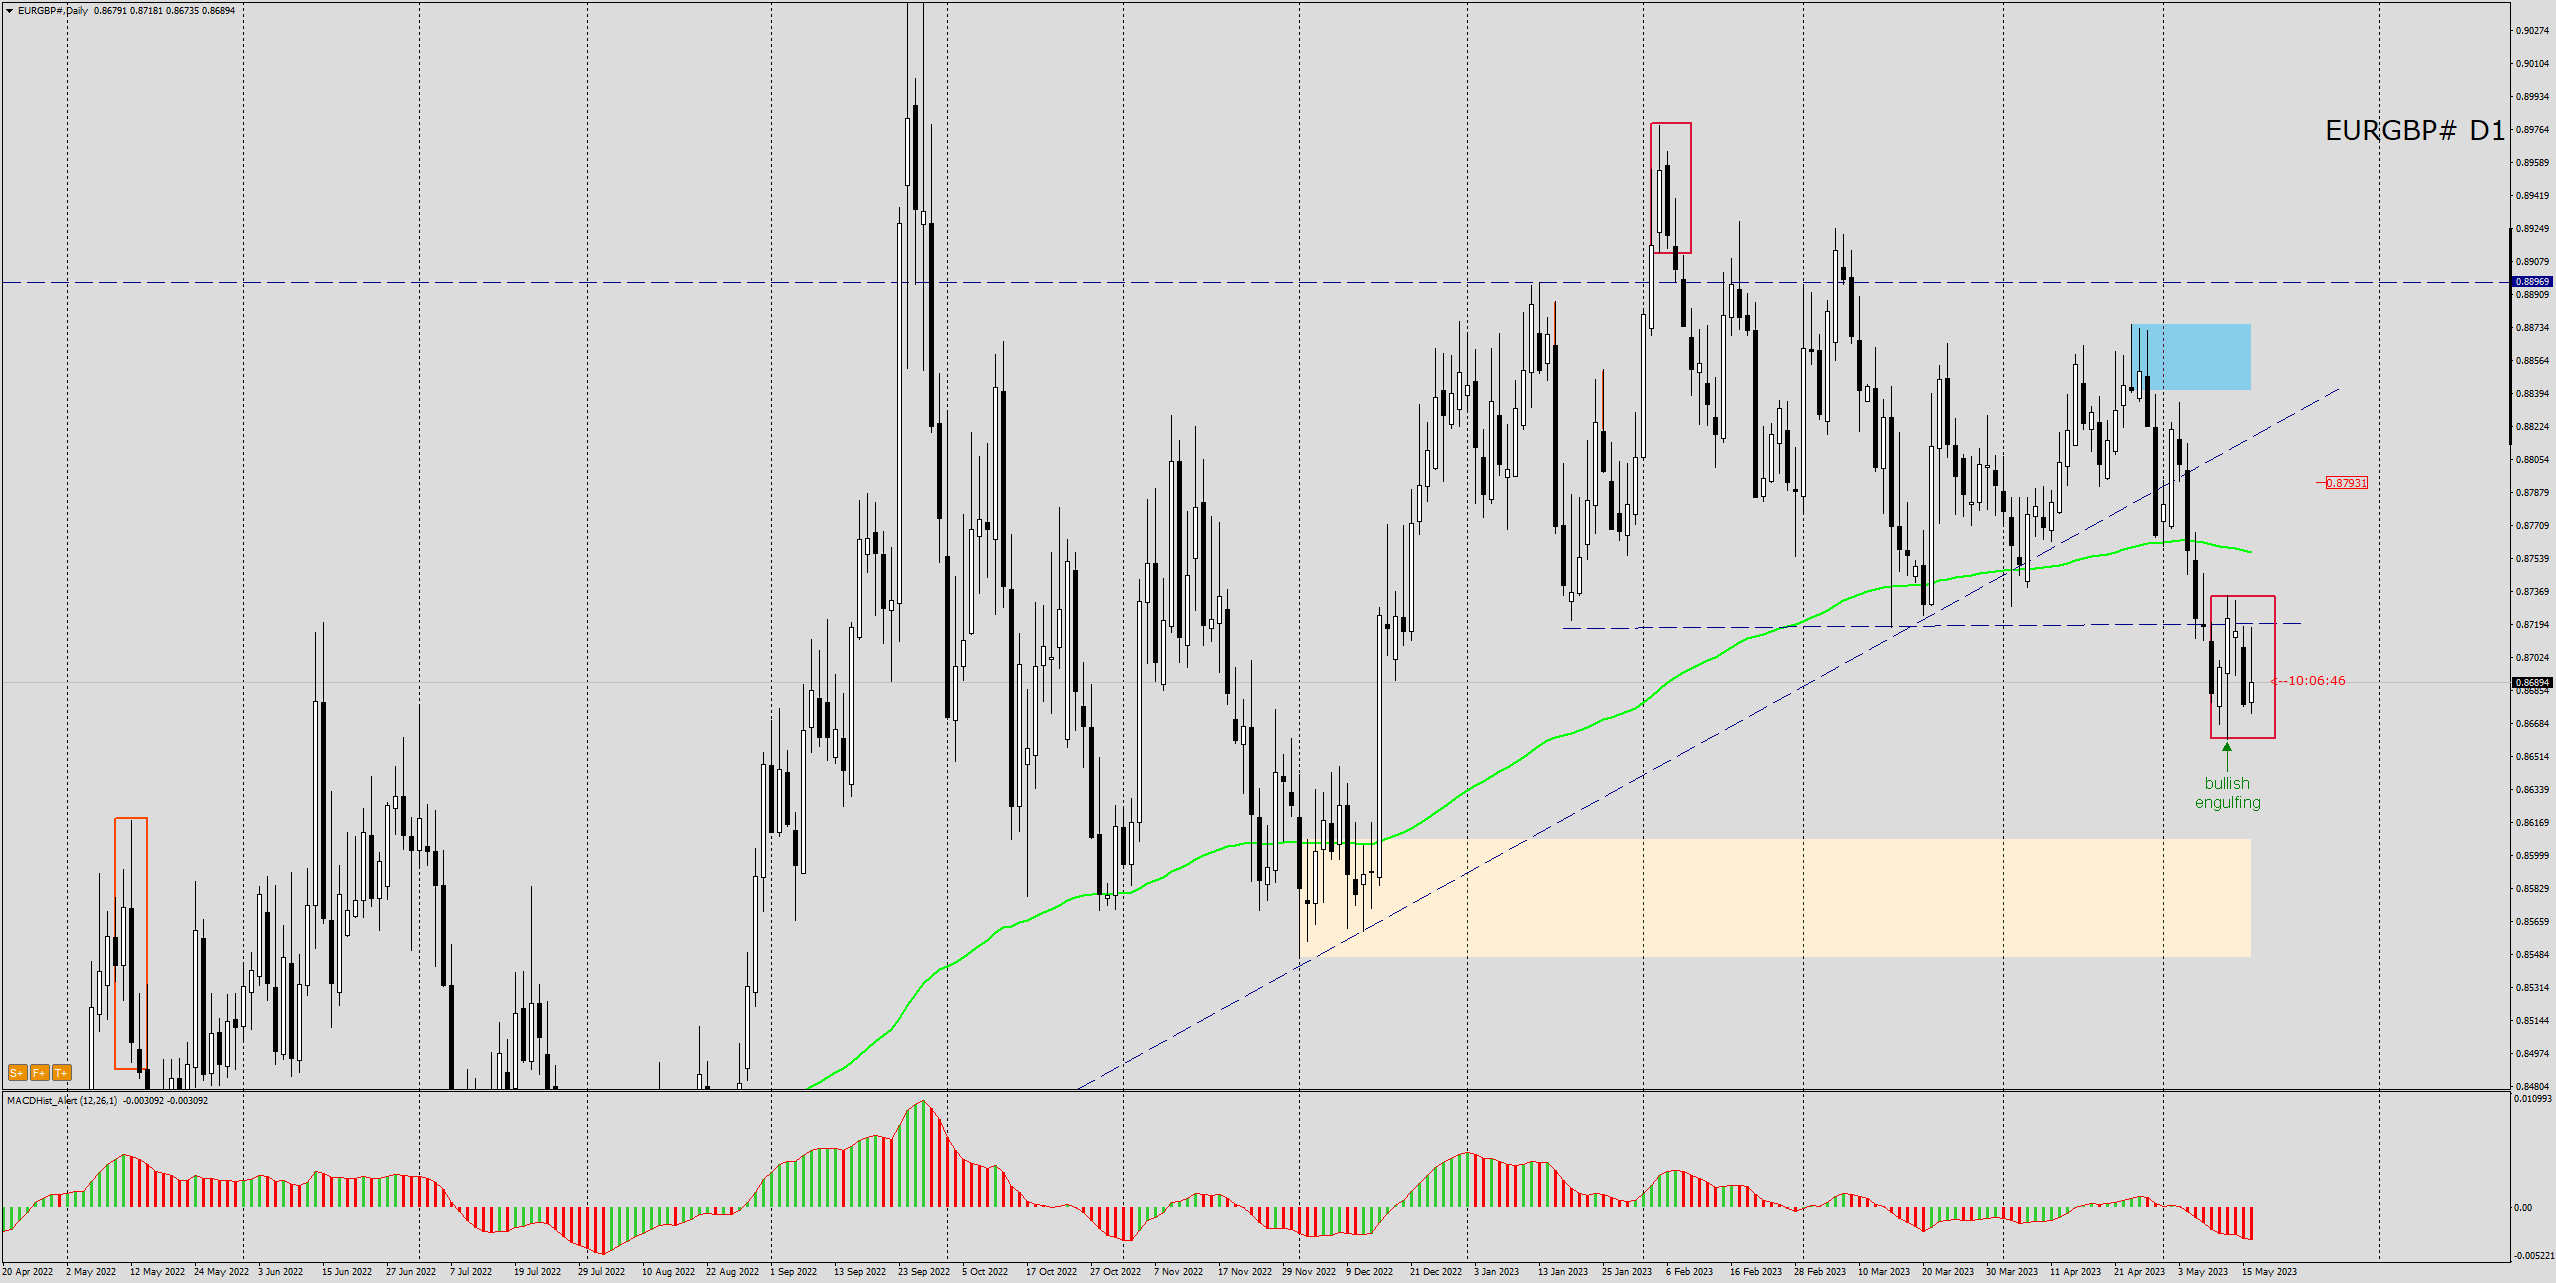 EURGBP D1 - bullish engulfing, price still within the formation. We are waiting for a breakout.